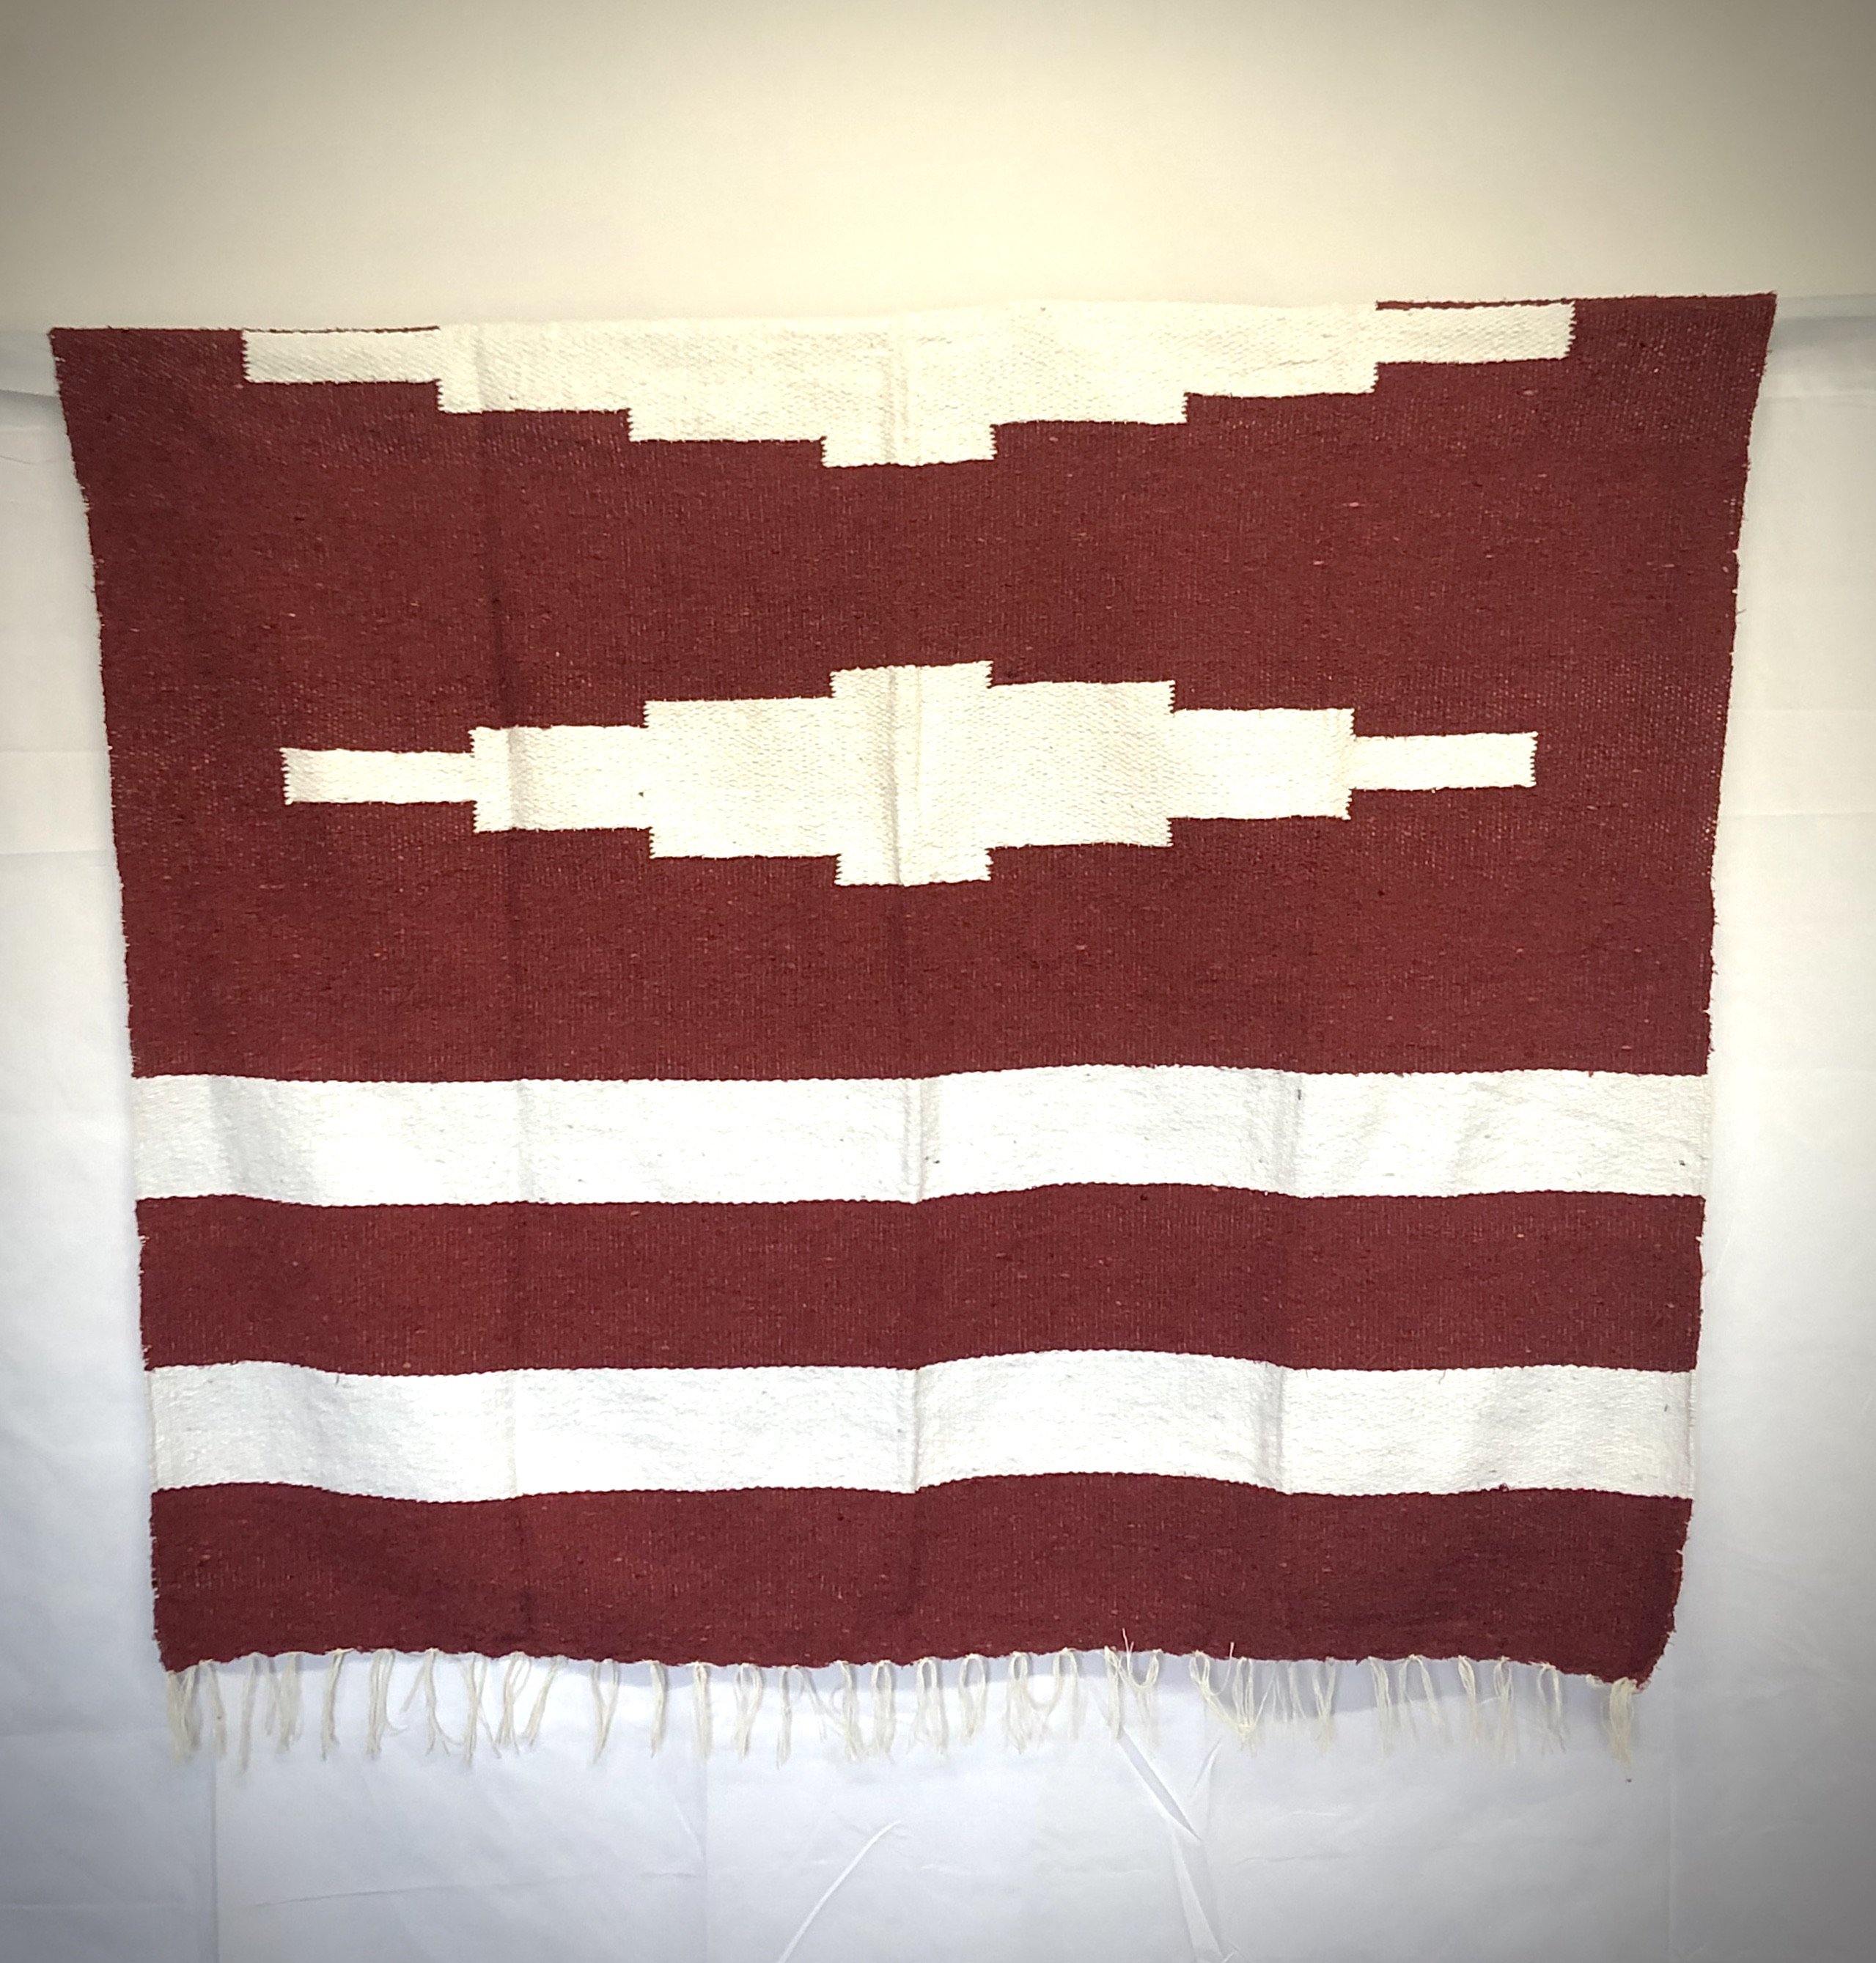 The In/Out “Navajo” Blanket - HomageMade 